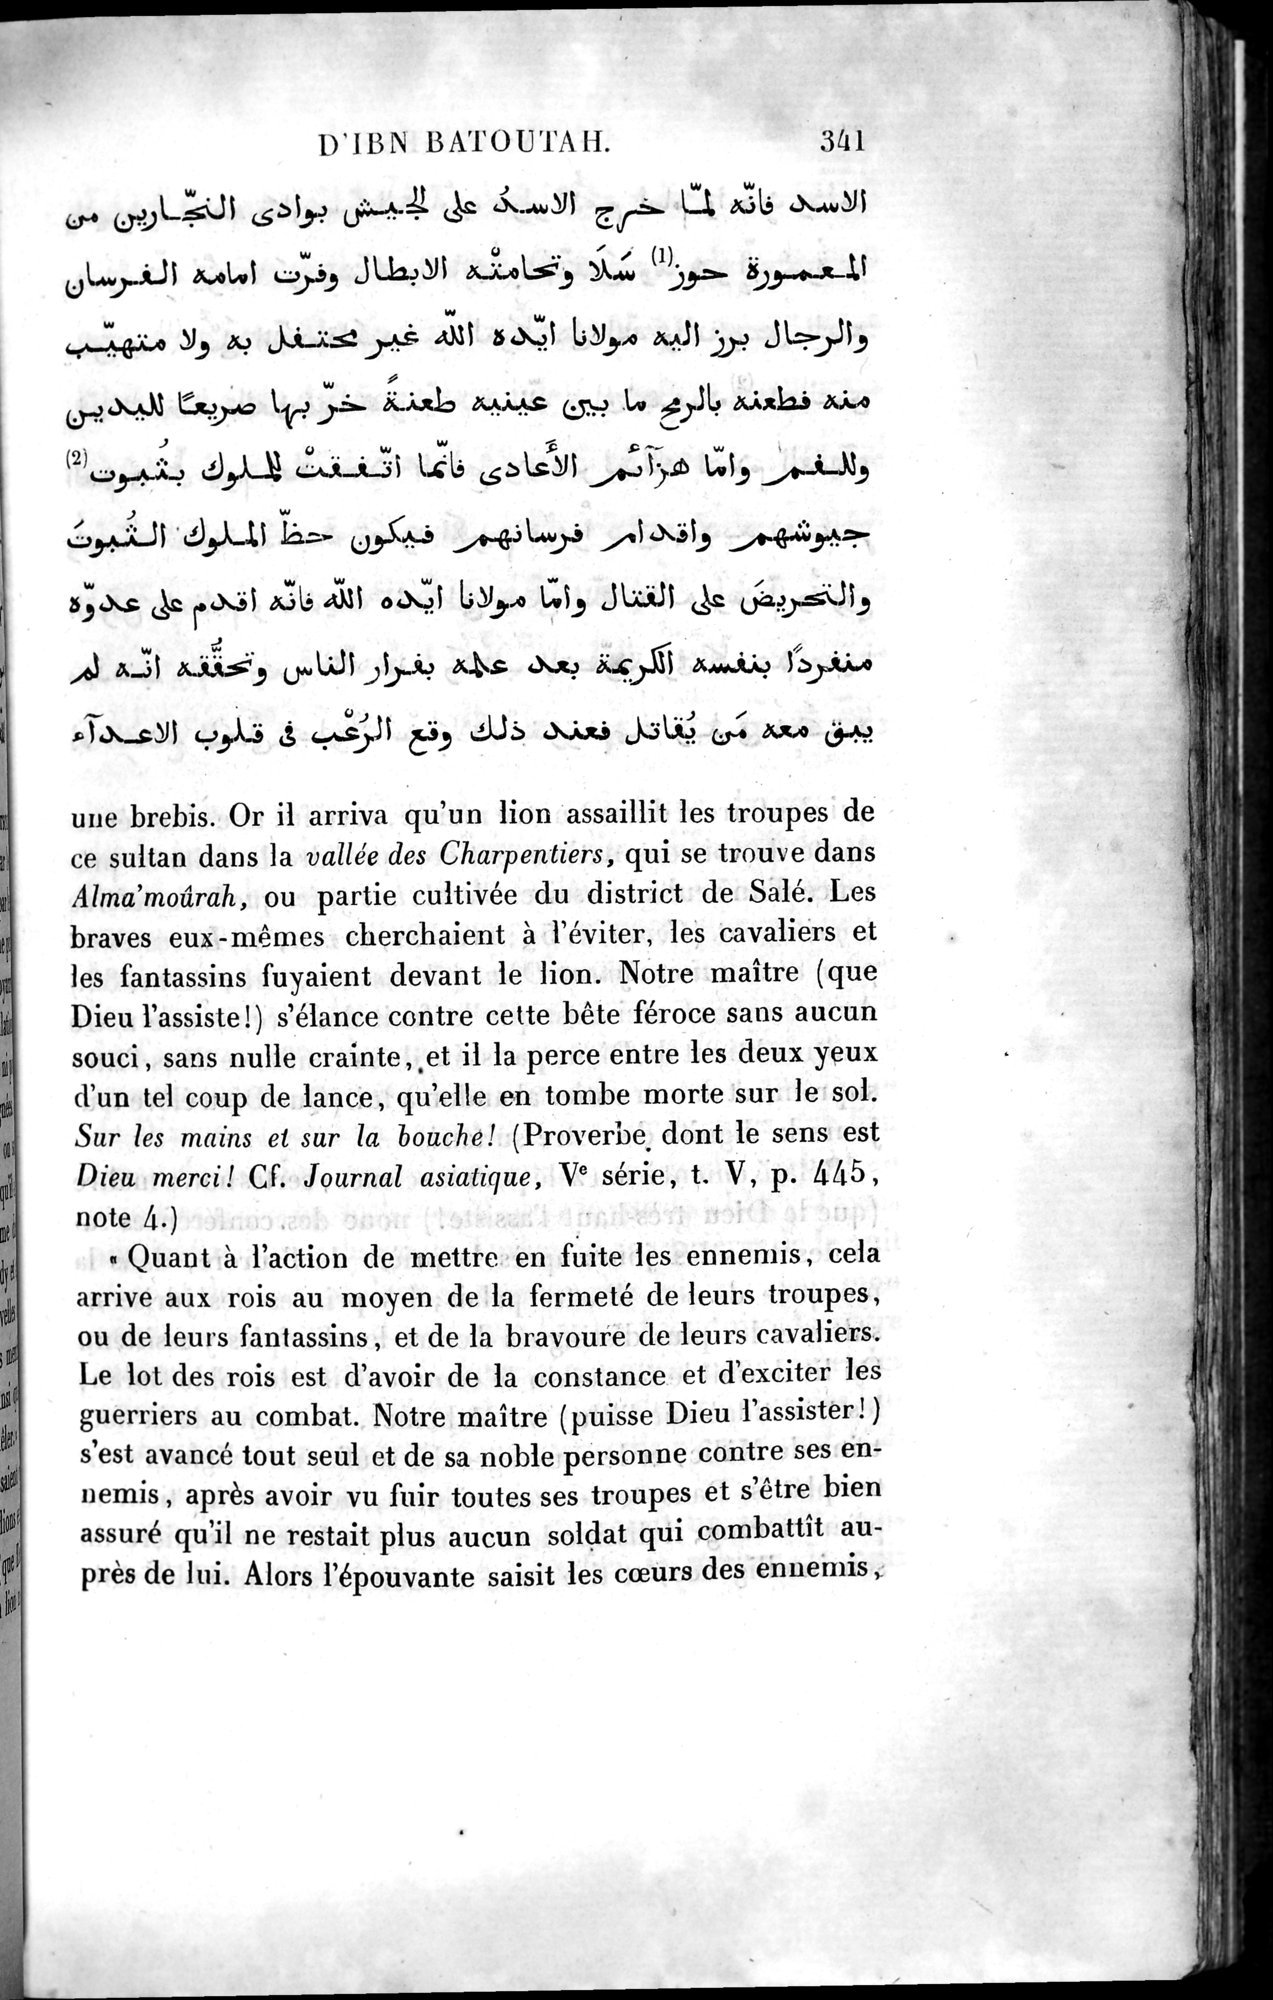 Voyages d'Ibn Batoutah : vol.4 / Page 353 (Grayscale High Resolution Image)